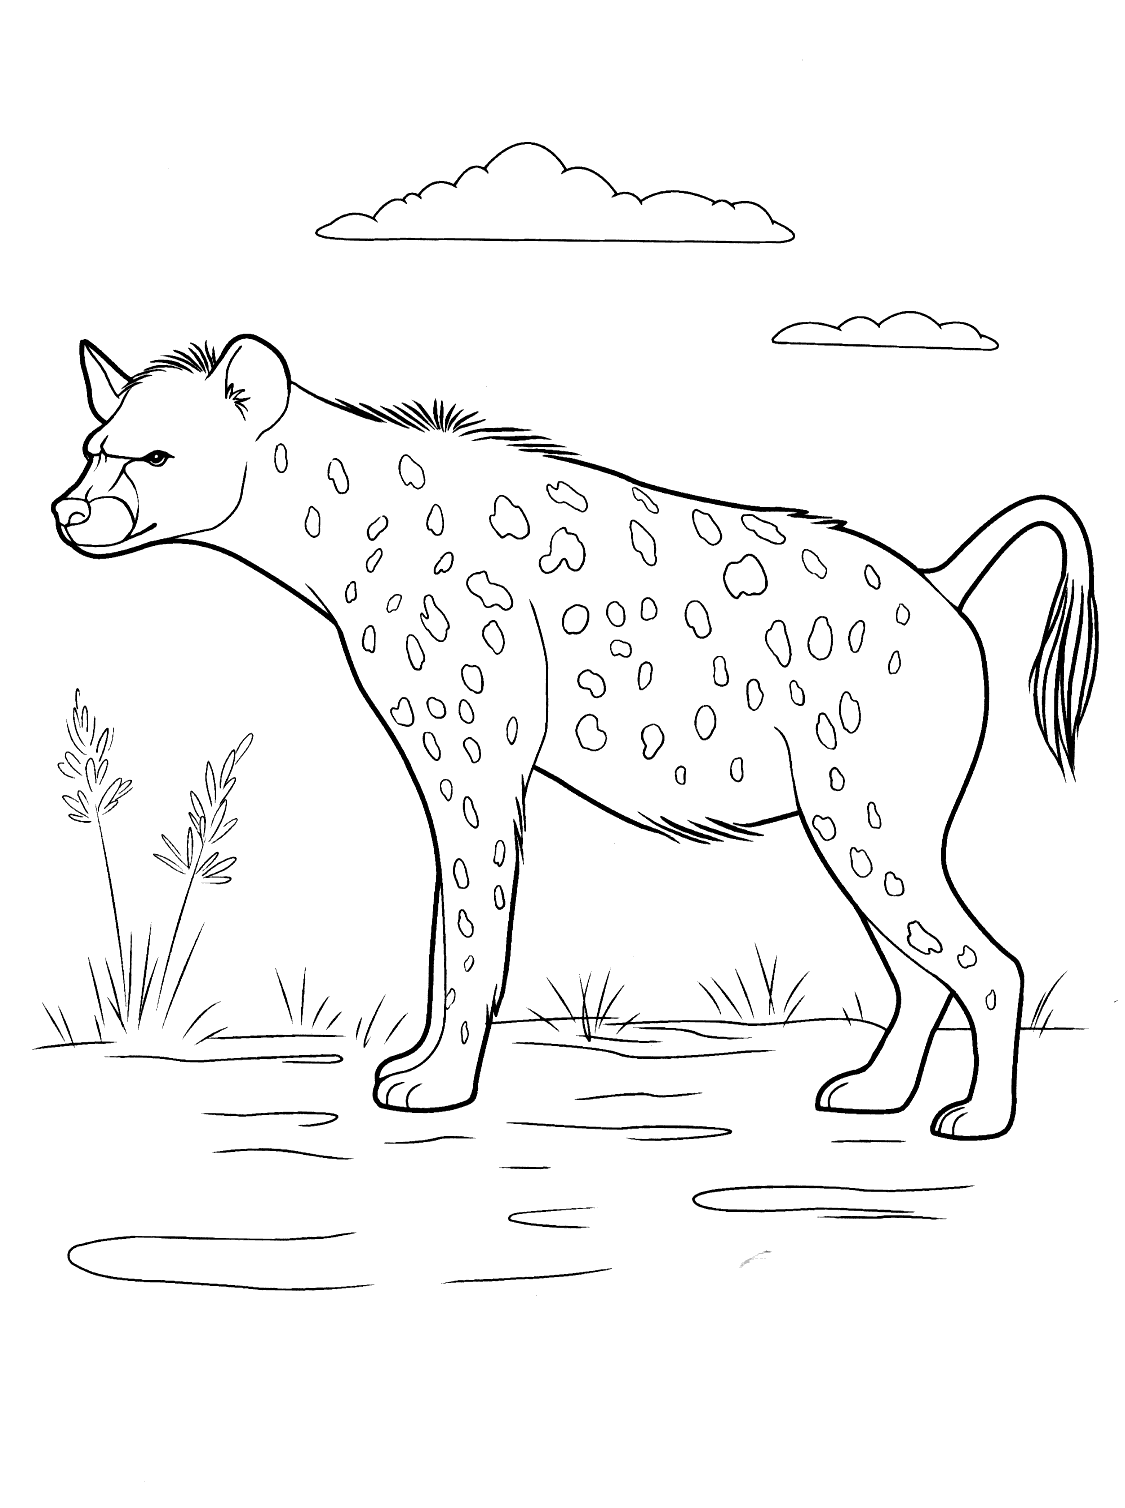 Coloring page - Hyena on the hunt